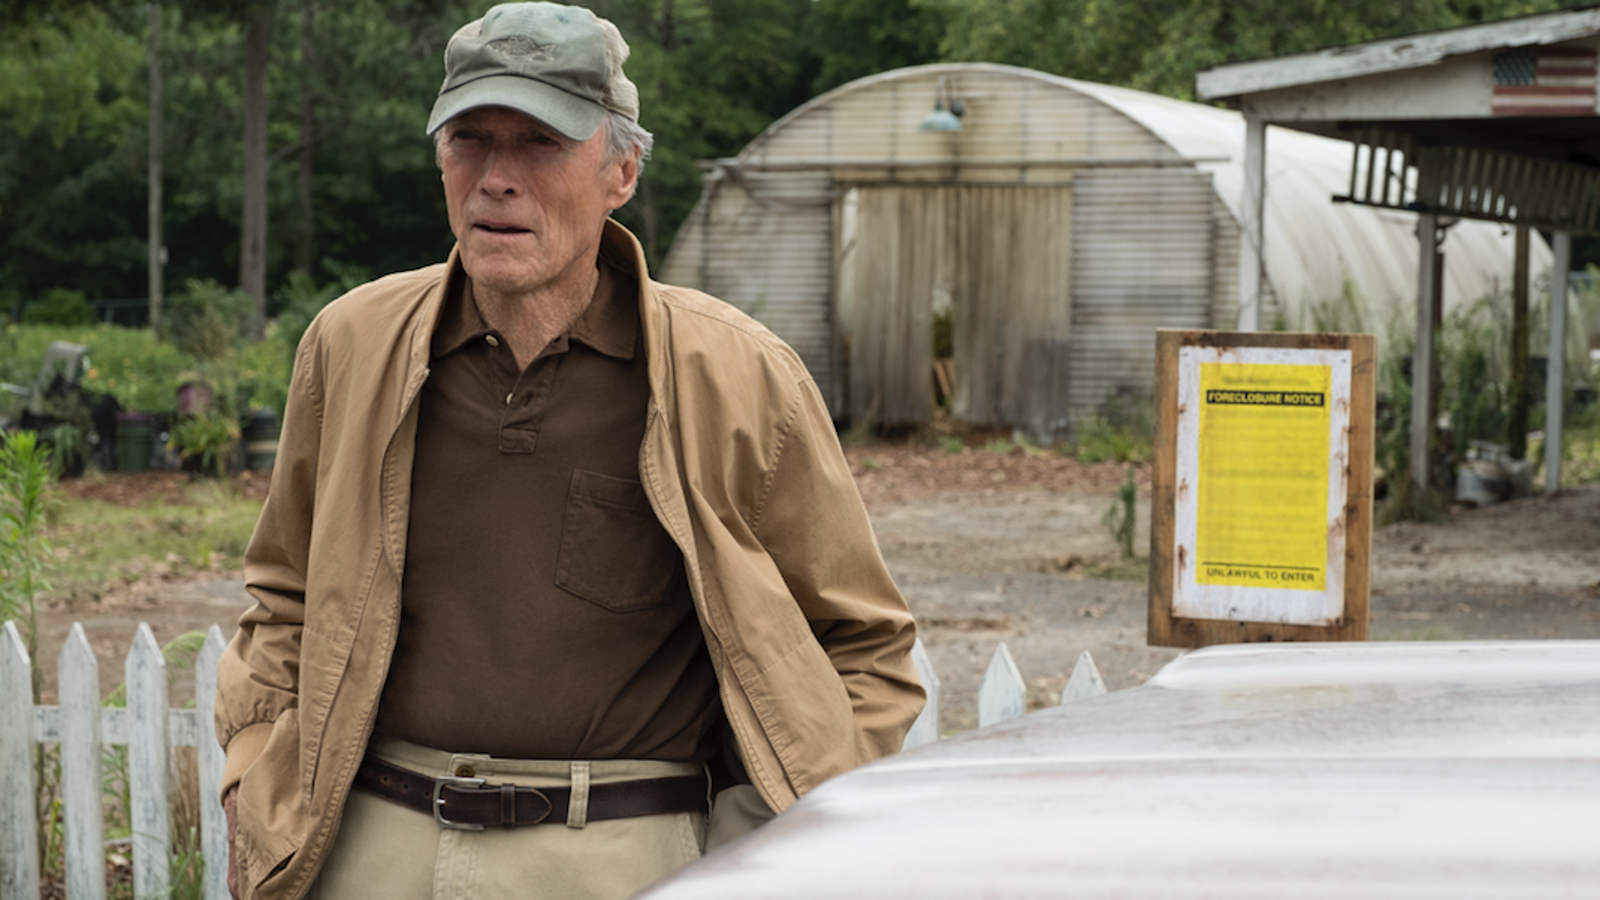 Clint Eastwood reemerges from retirement for one last drug run in The Mule